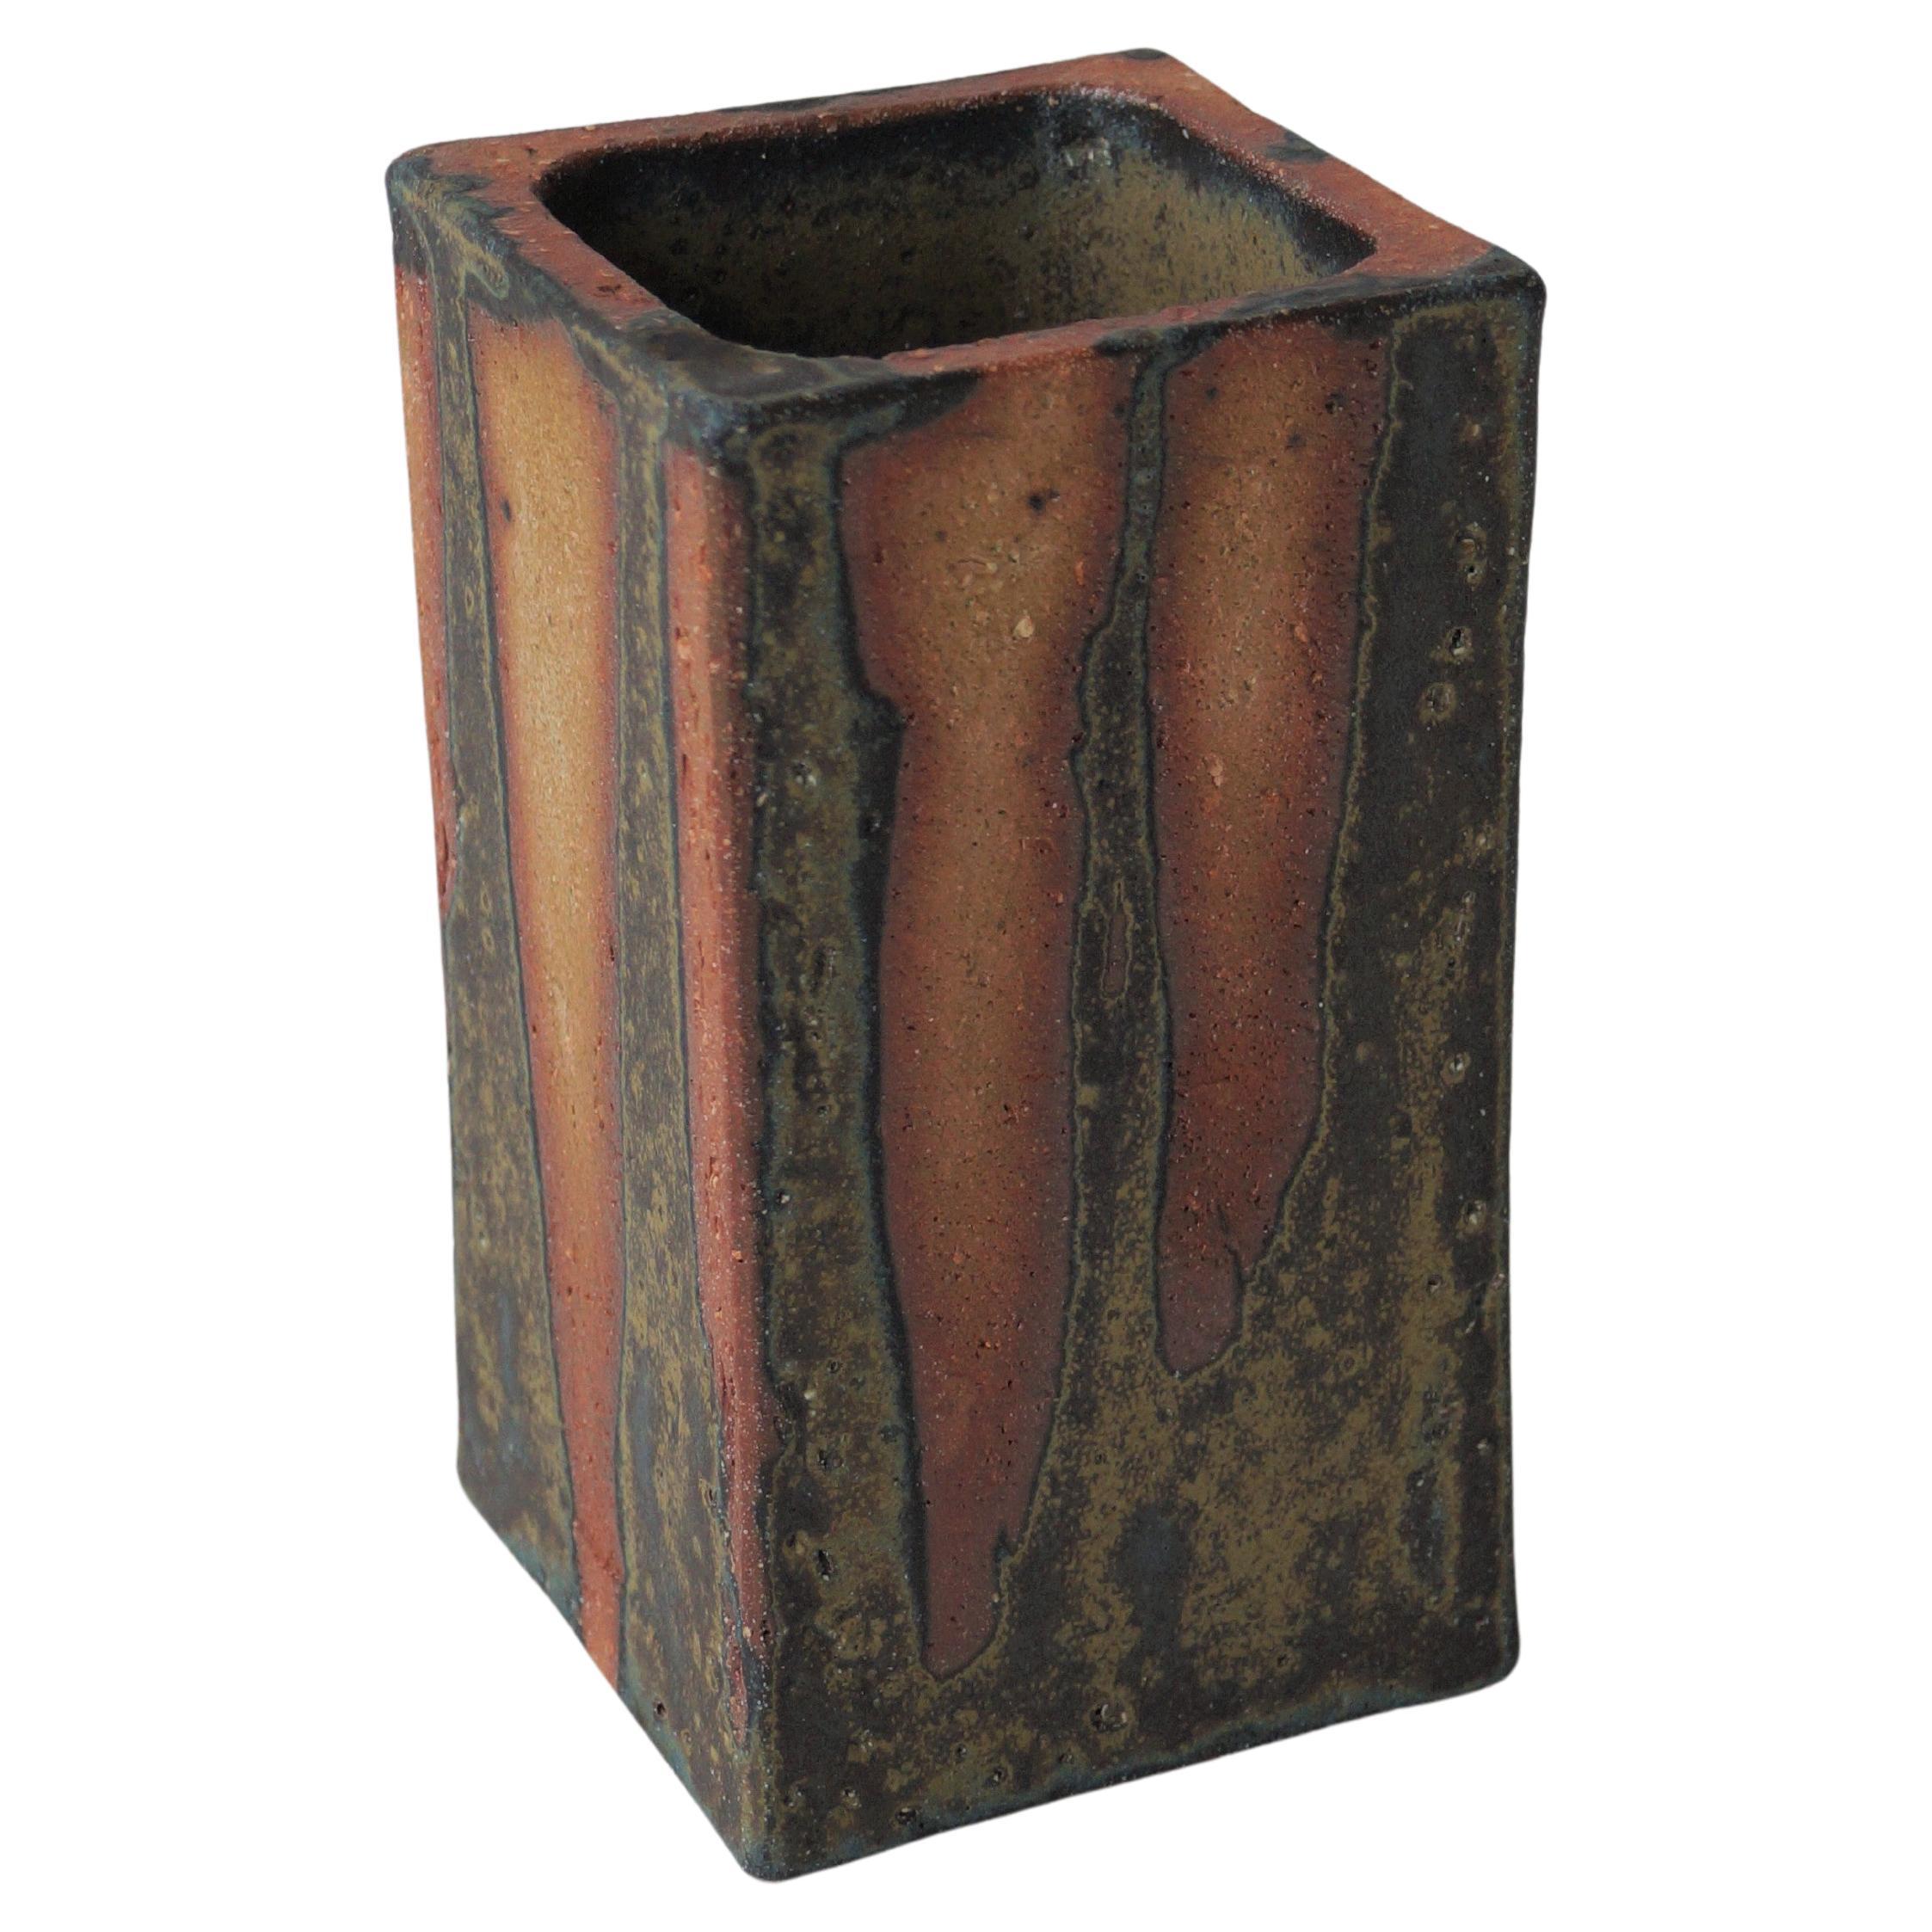 Jan de Rooden glazed clay vase, made in own studio, 2006. Signed and dated. 
This rare piece belongs to one of the last series of artworks created by Jan de Rooden from around 2004 to 2006. 2006 being the last year Jan was active as a ceramist and